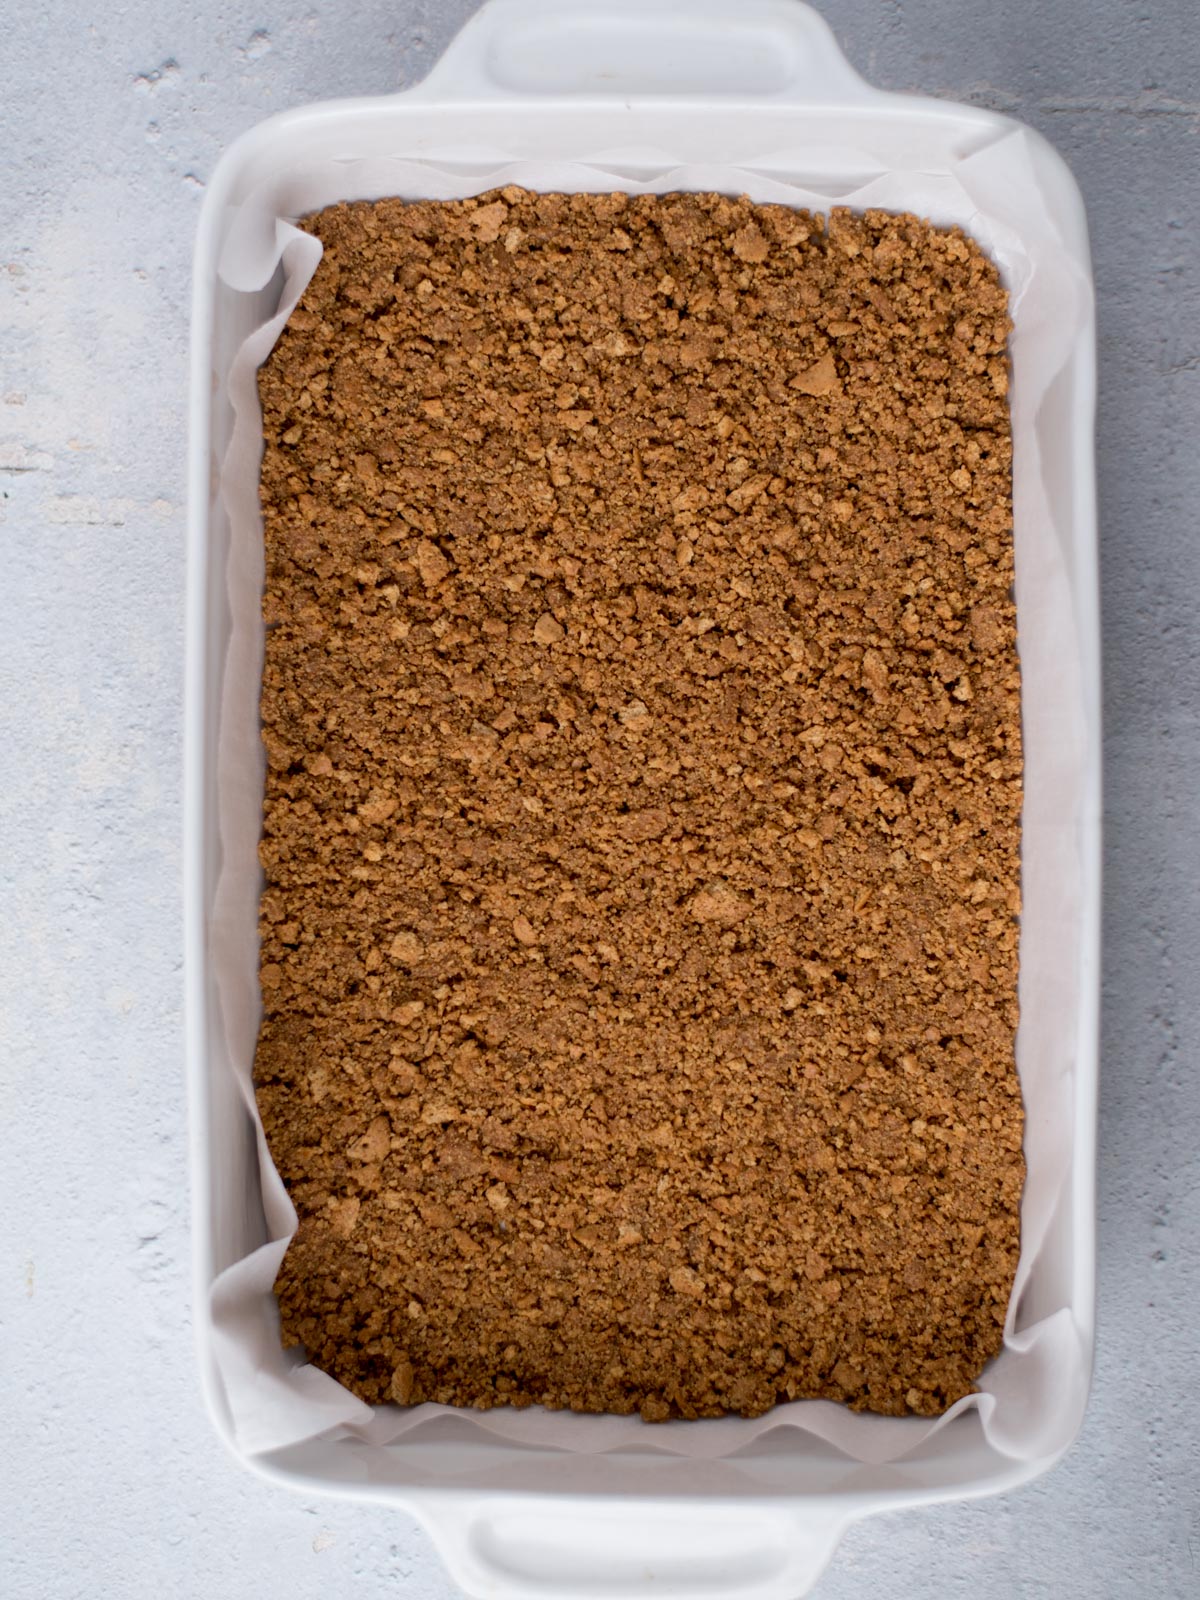 baked graham cracker crust in a 9x13 dish